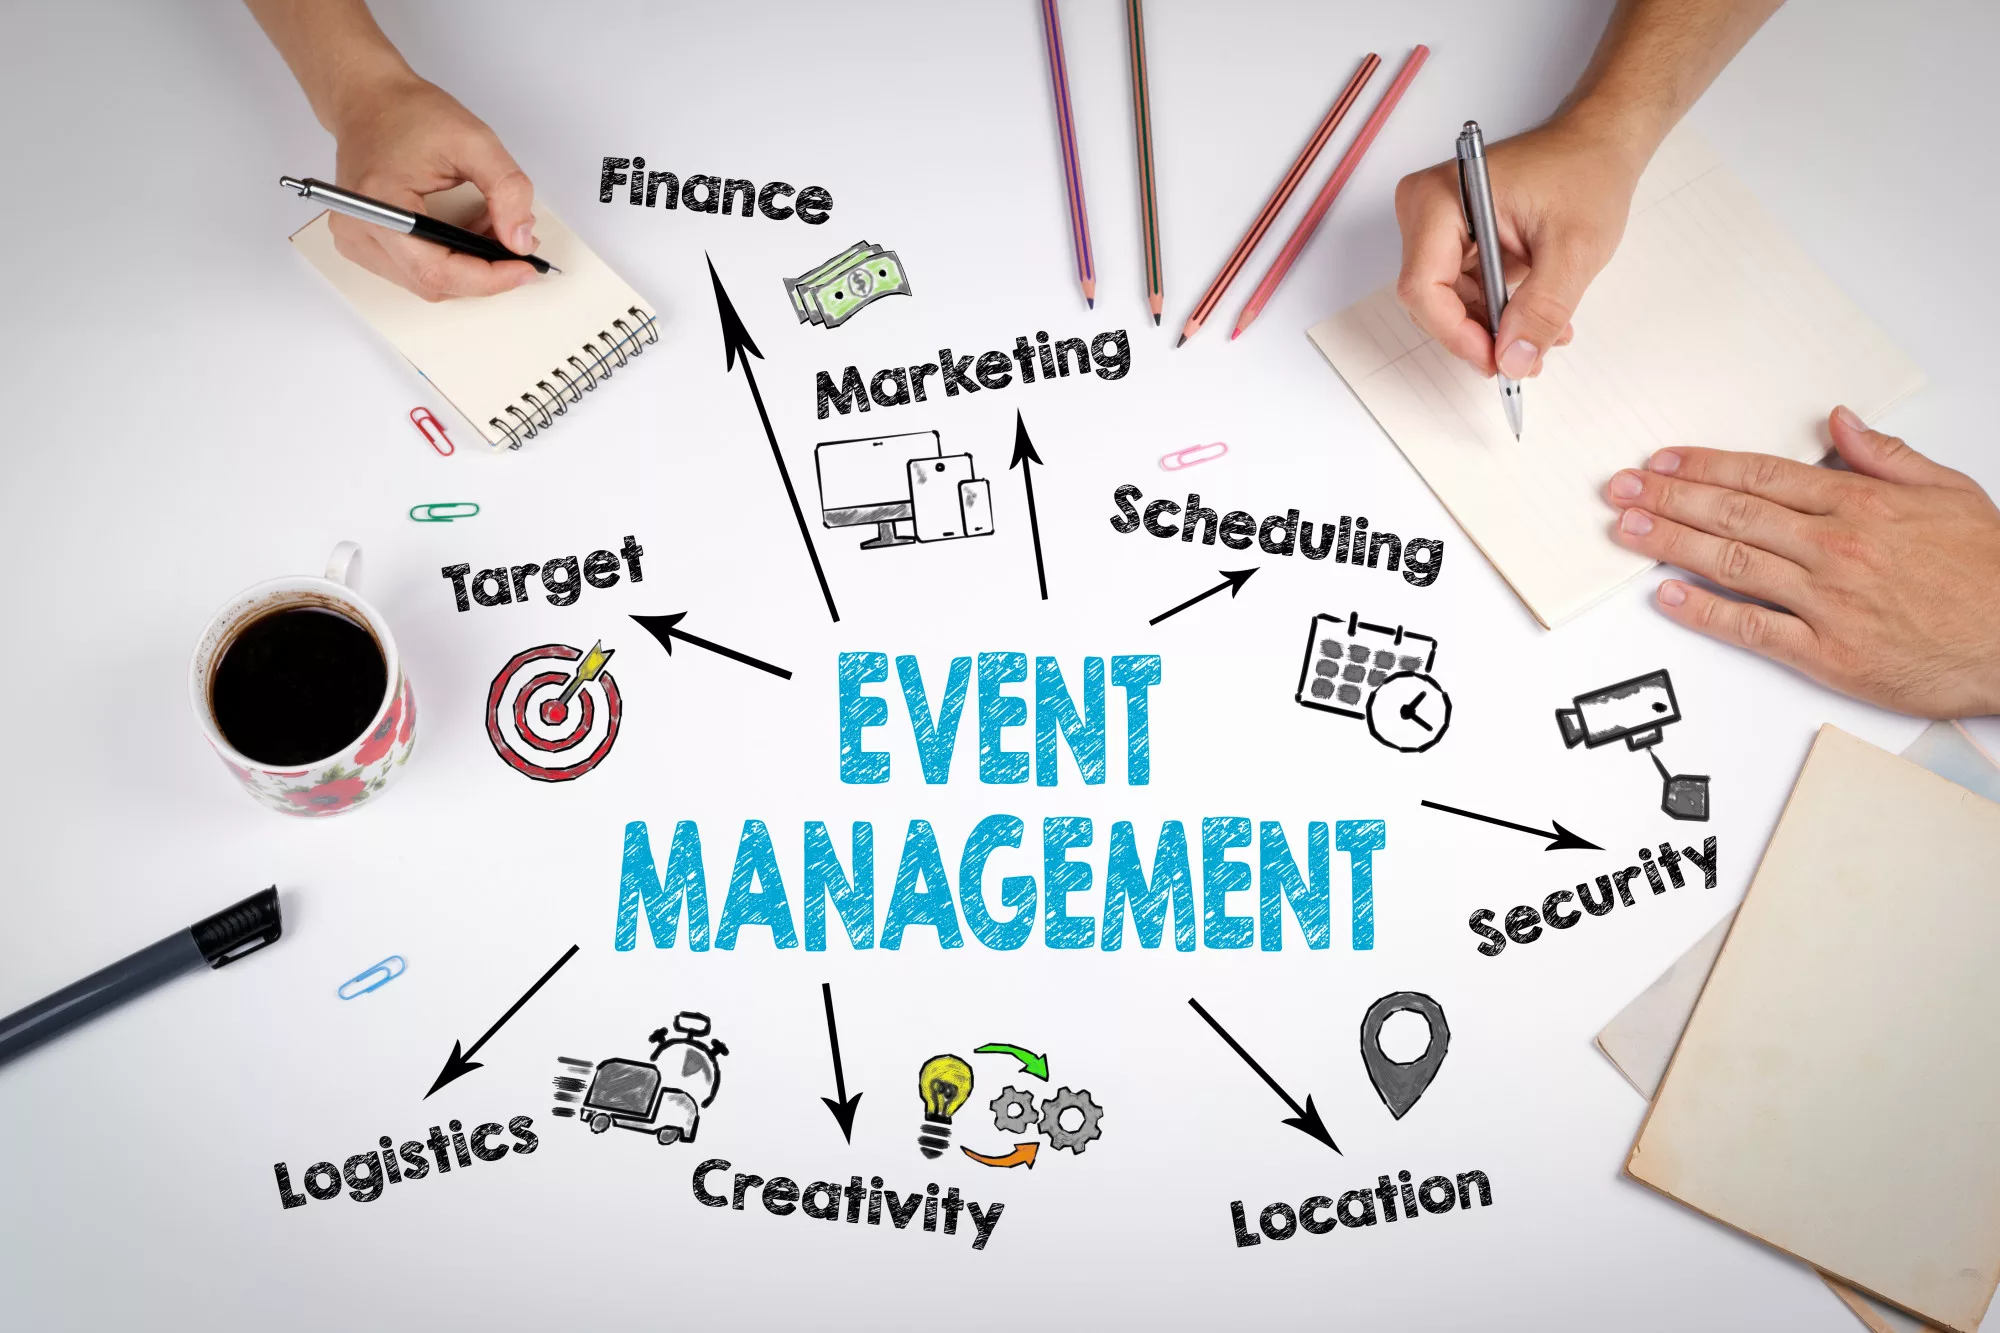 event management business plan in india